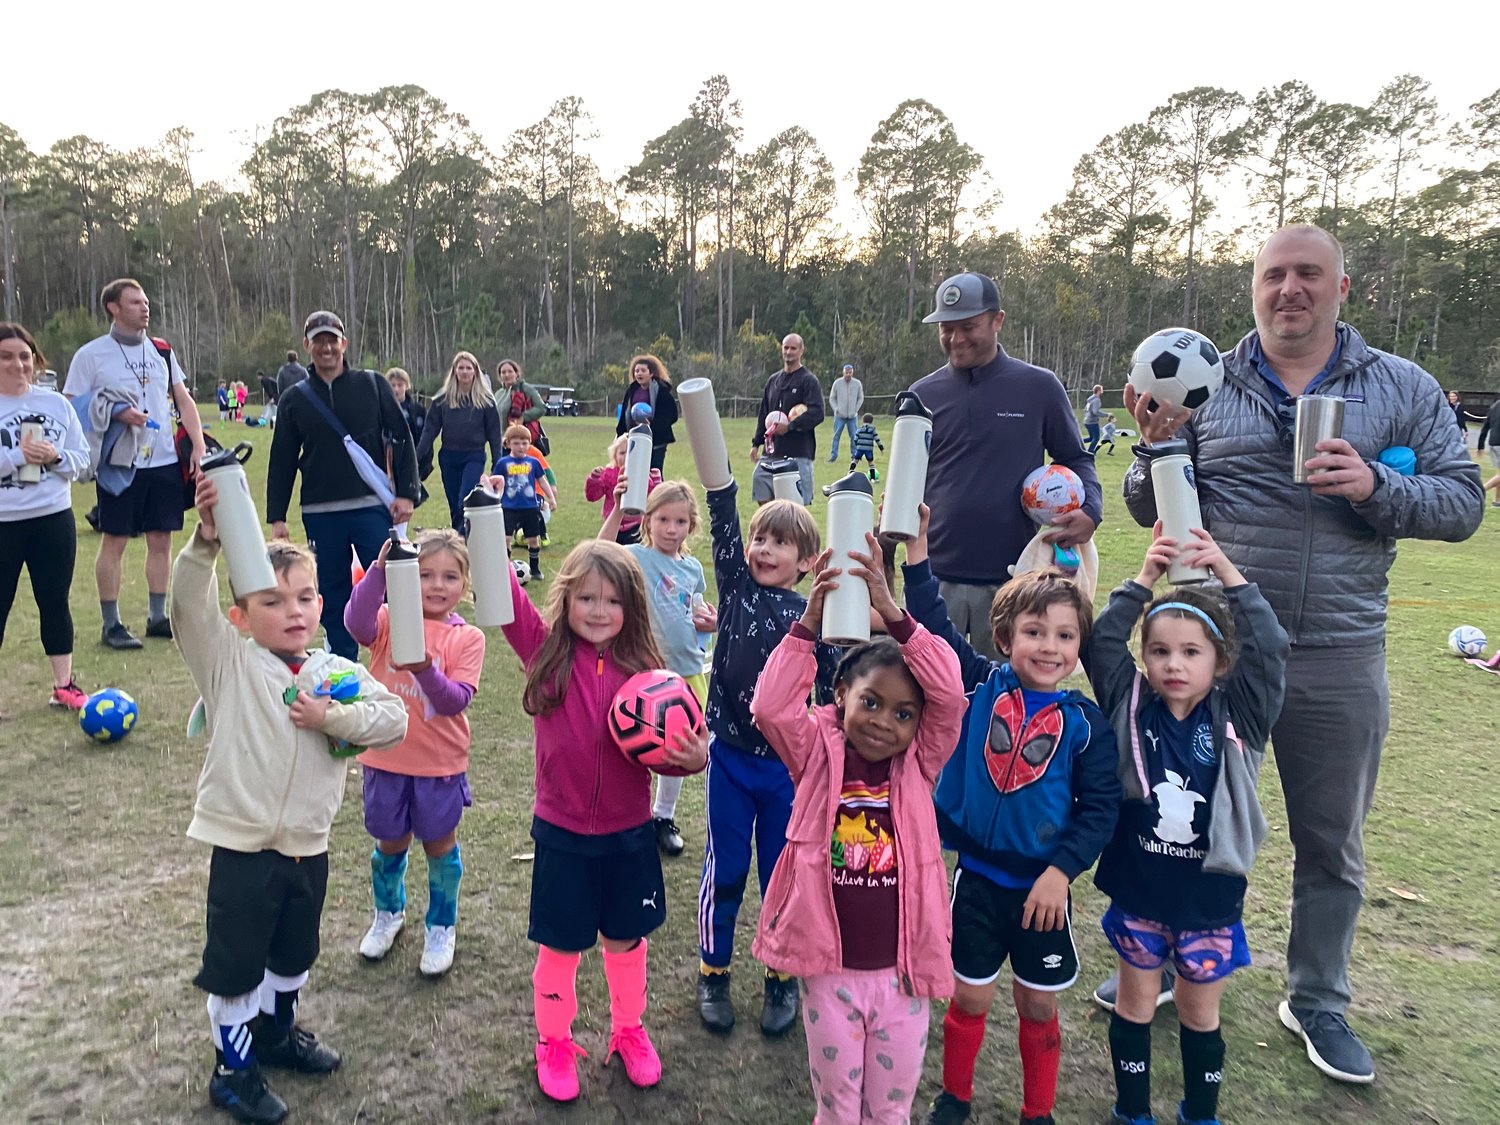 Beaches Go Green, in partnership with Flagler Health+ and the Ponte Vedra Athletic Association, has distributed more than 1,200 stainless-steel water bottles to youth sports participants to use instead of single-use cups and plastic bottles.